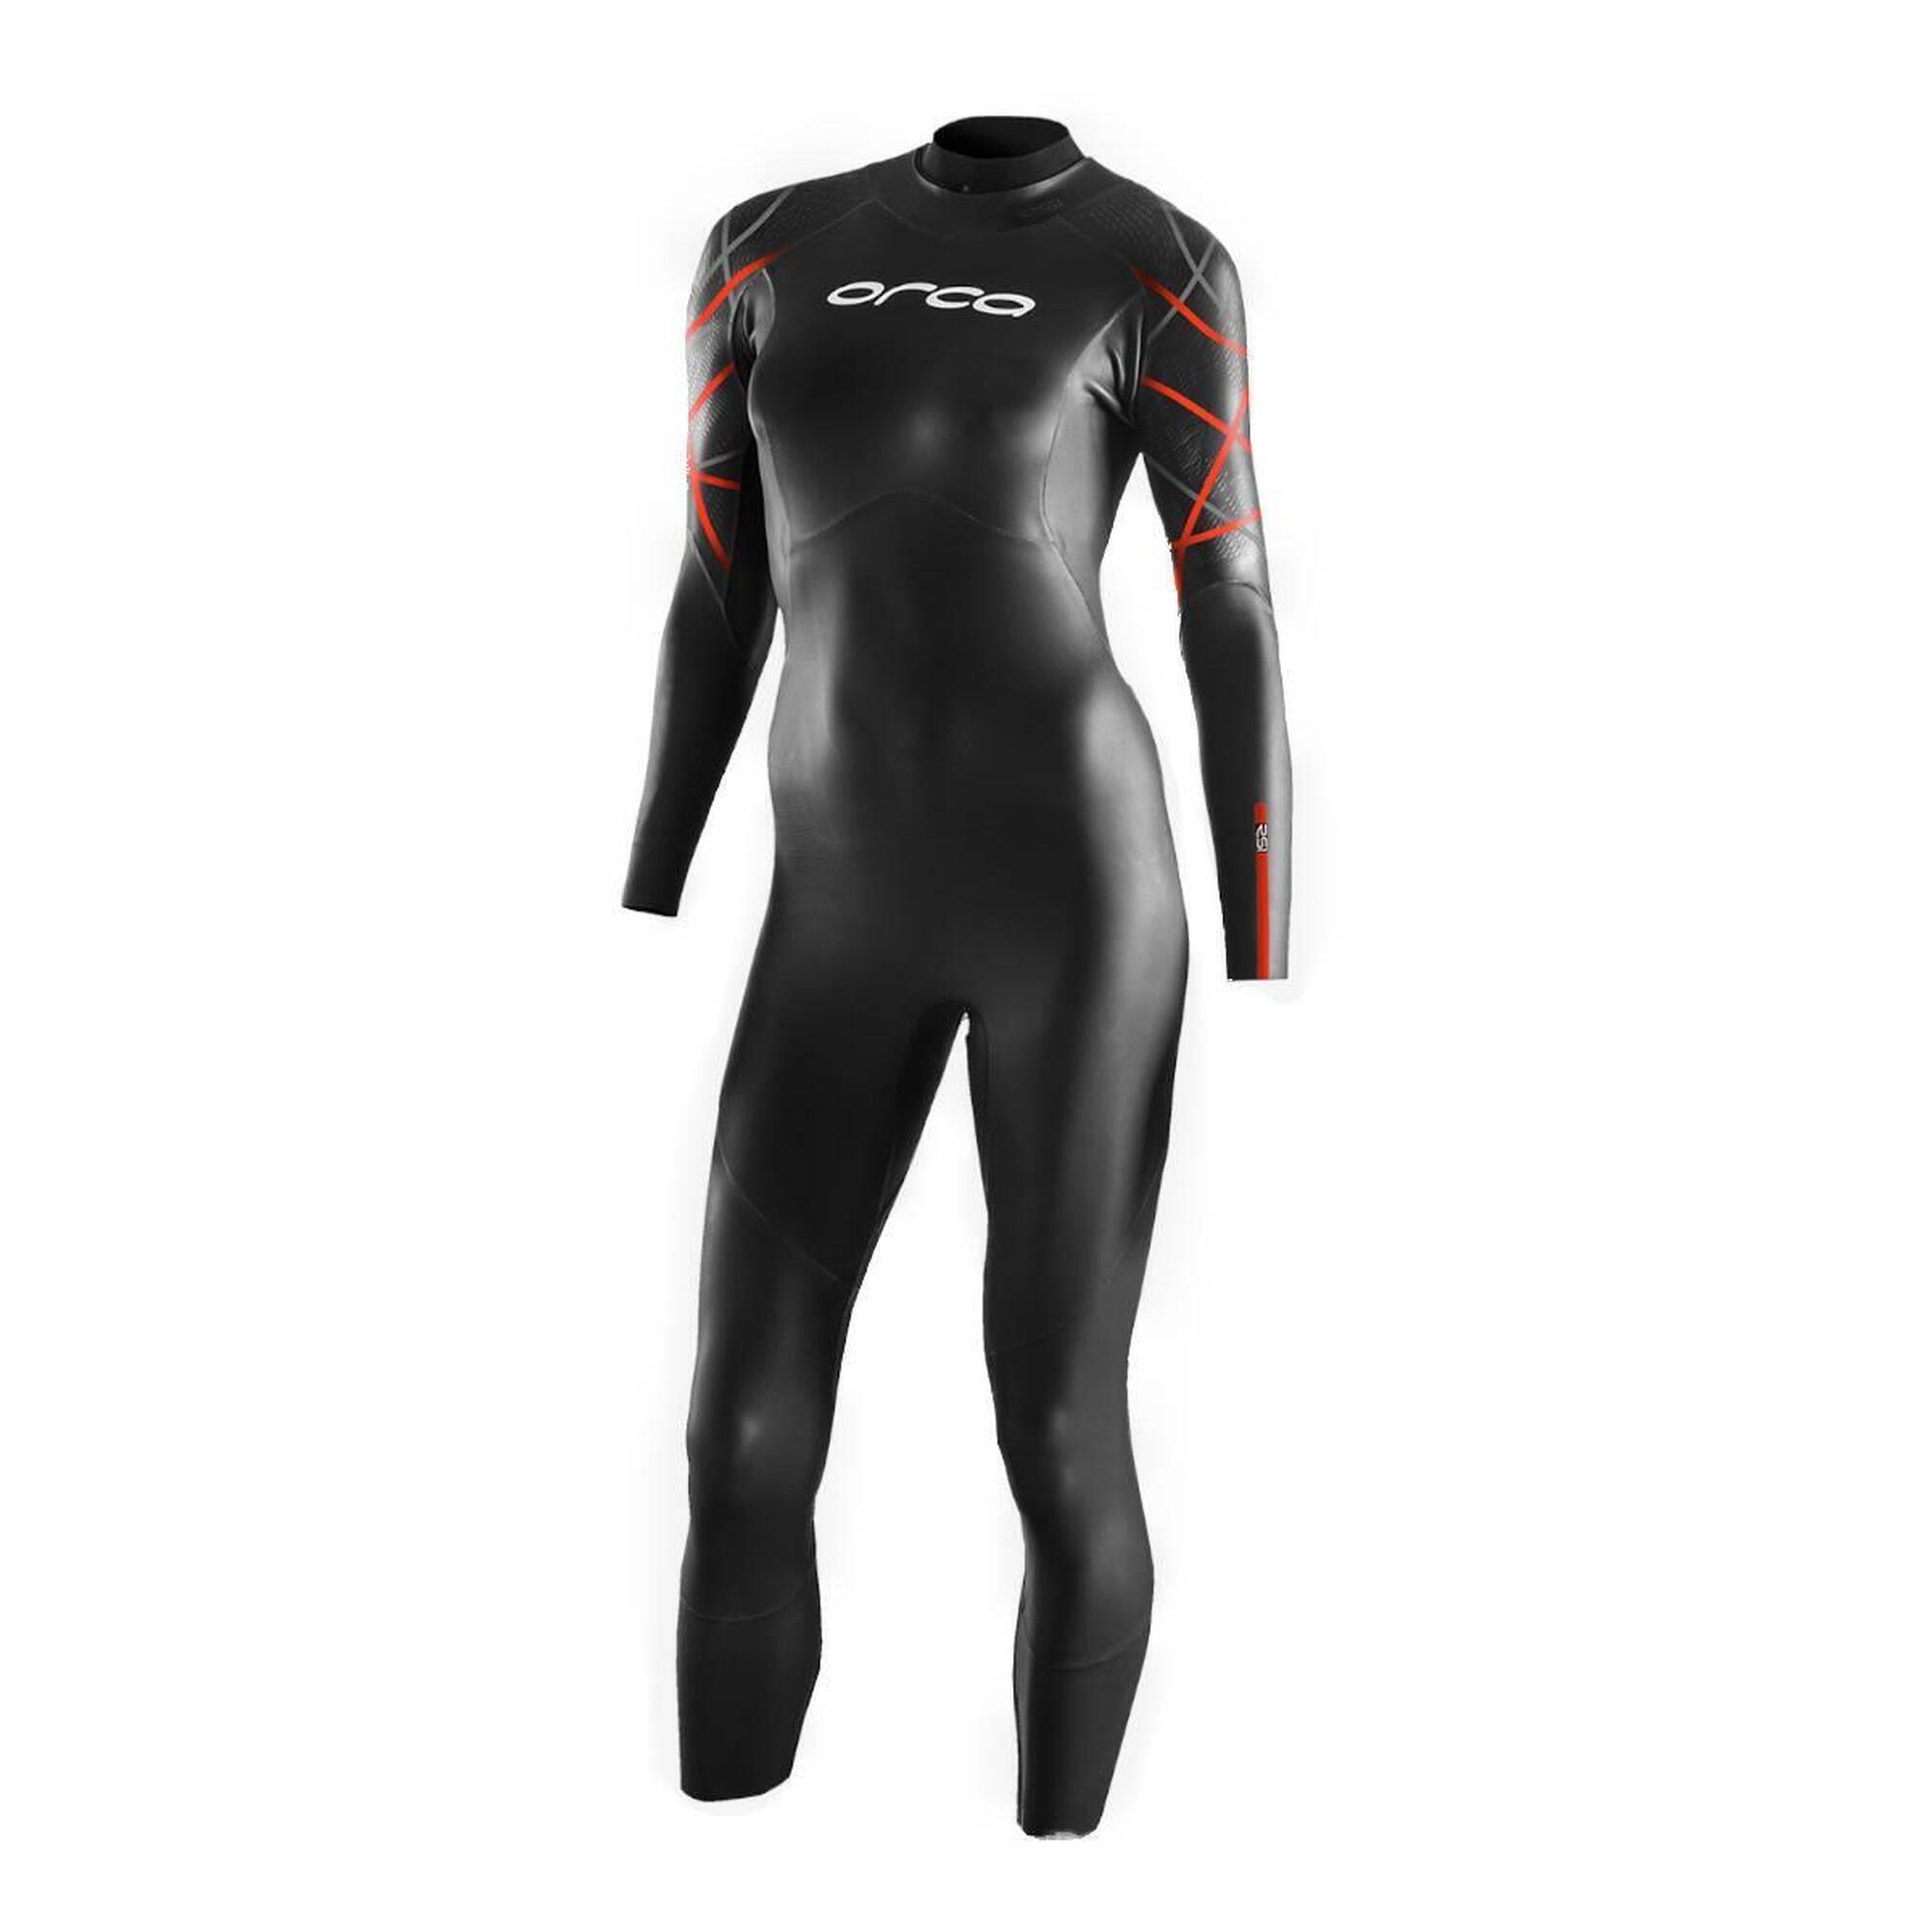 Orca Women's Openwater RS1 Thermal Wetsuit - Black/ Orange - Size XL 1/4